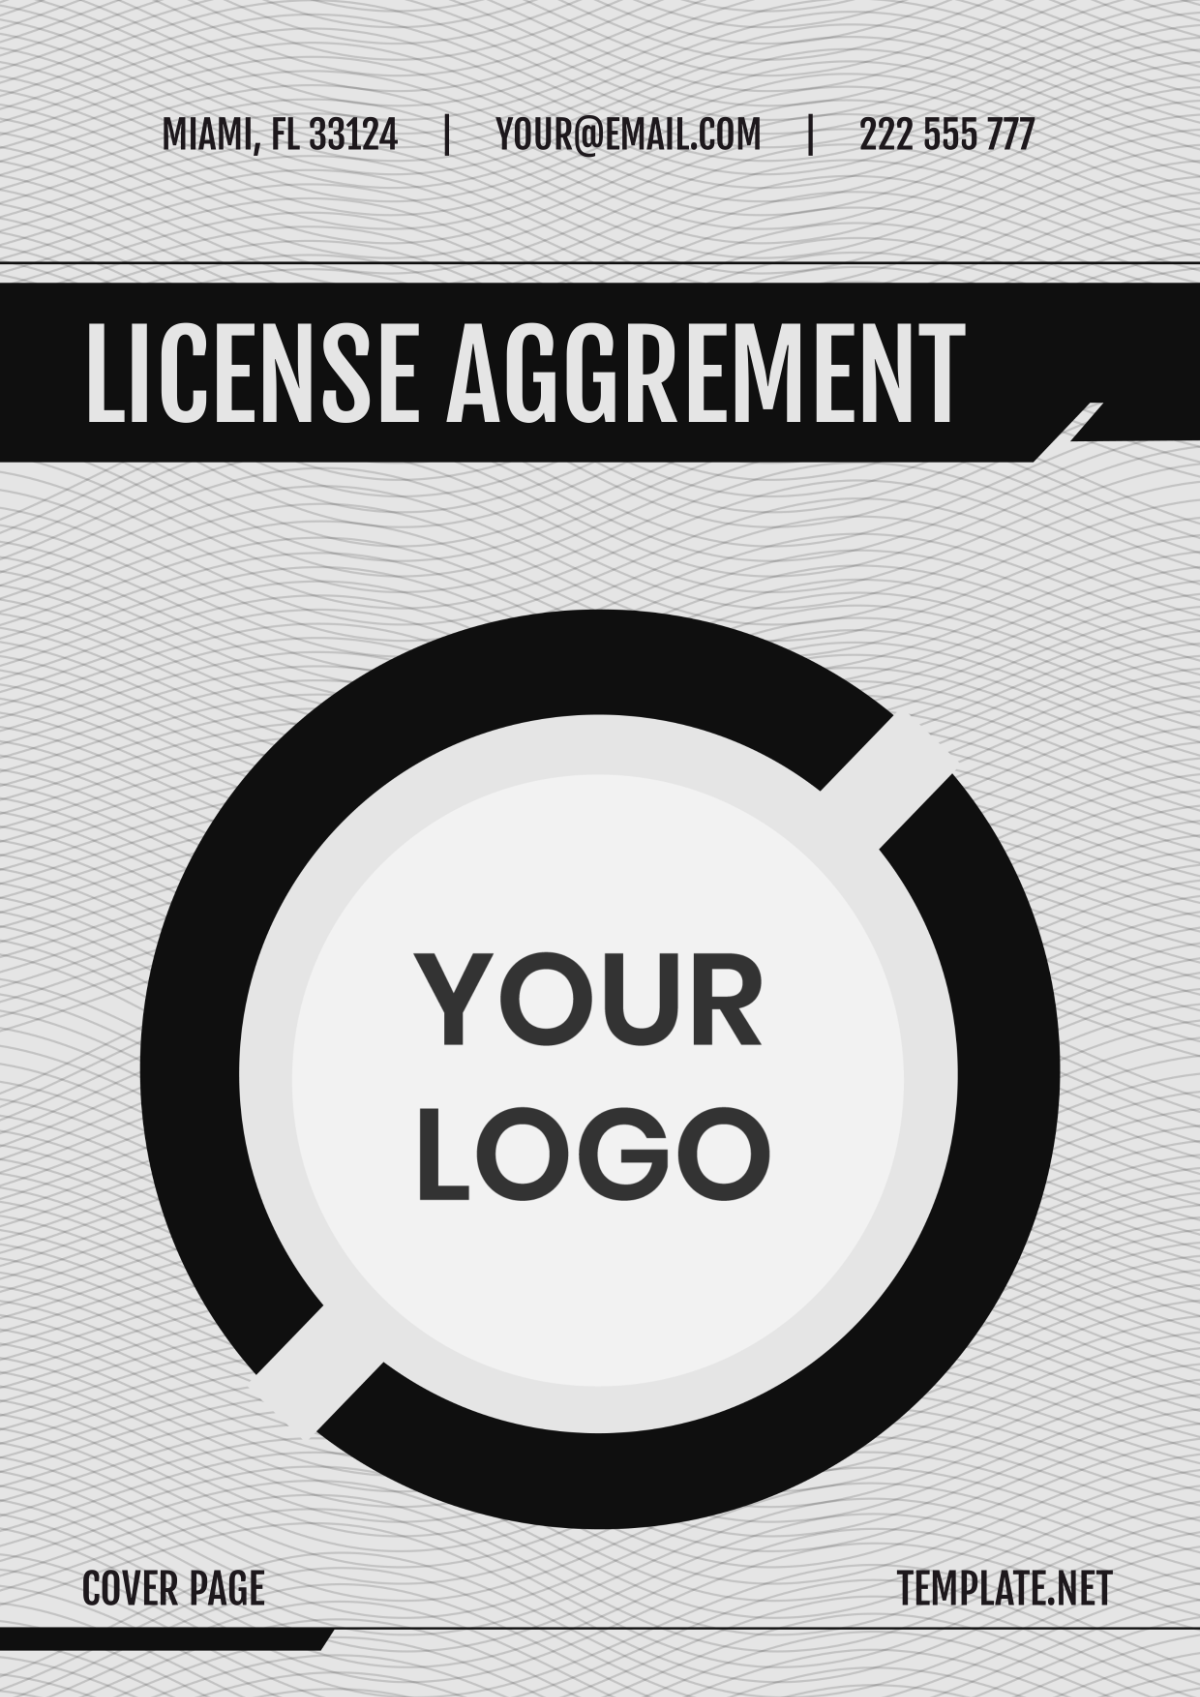 License Agreement Template